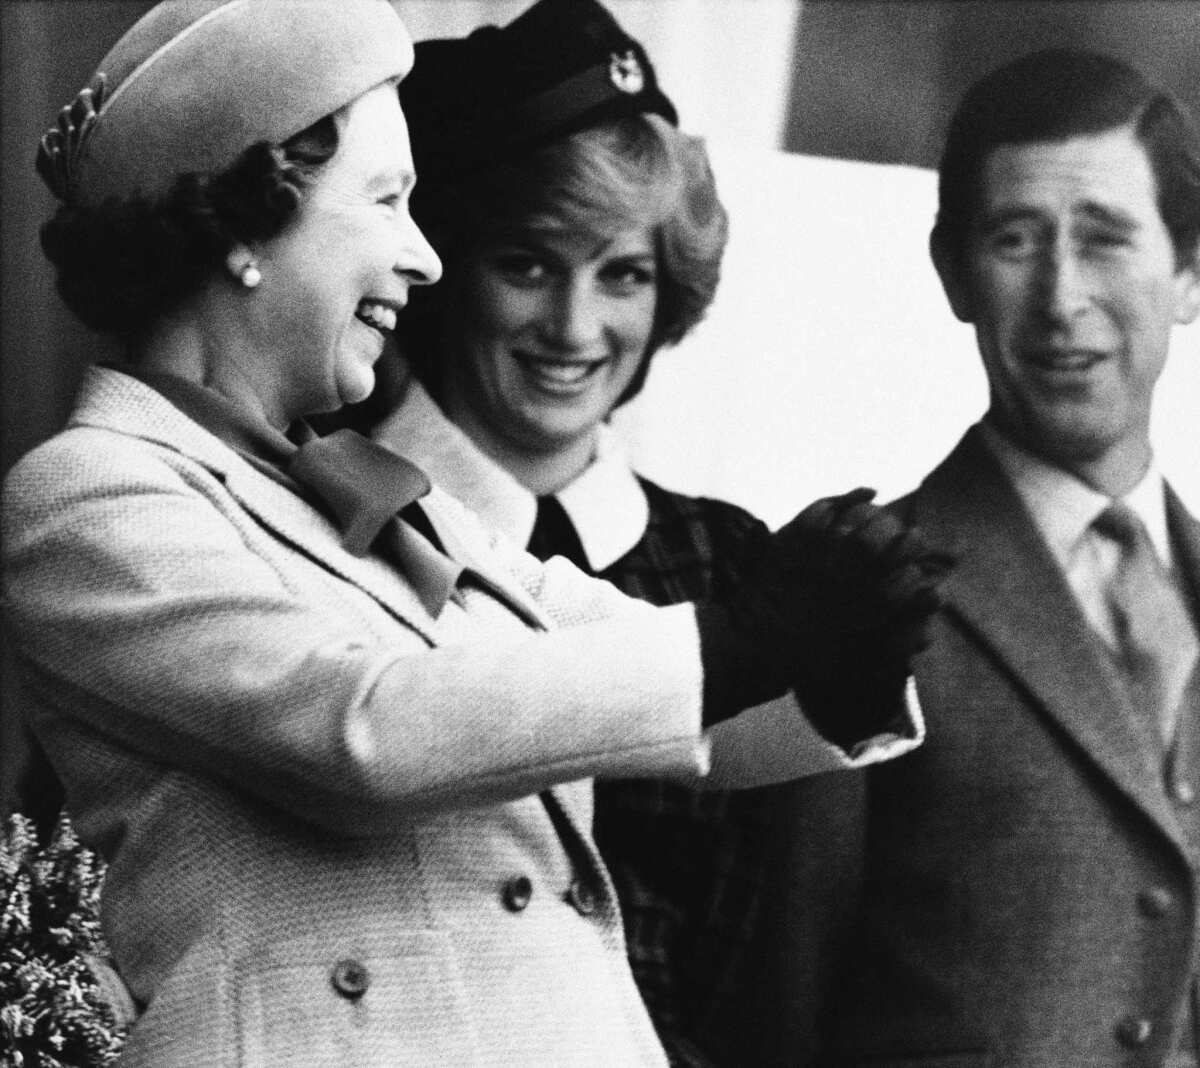 My relatives across the pond — Queen Elizabeth II, Princess Diana and Prince Charles — in 1982